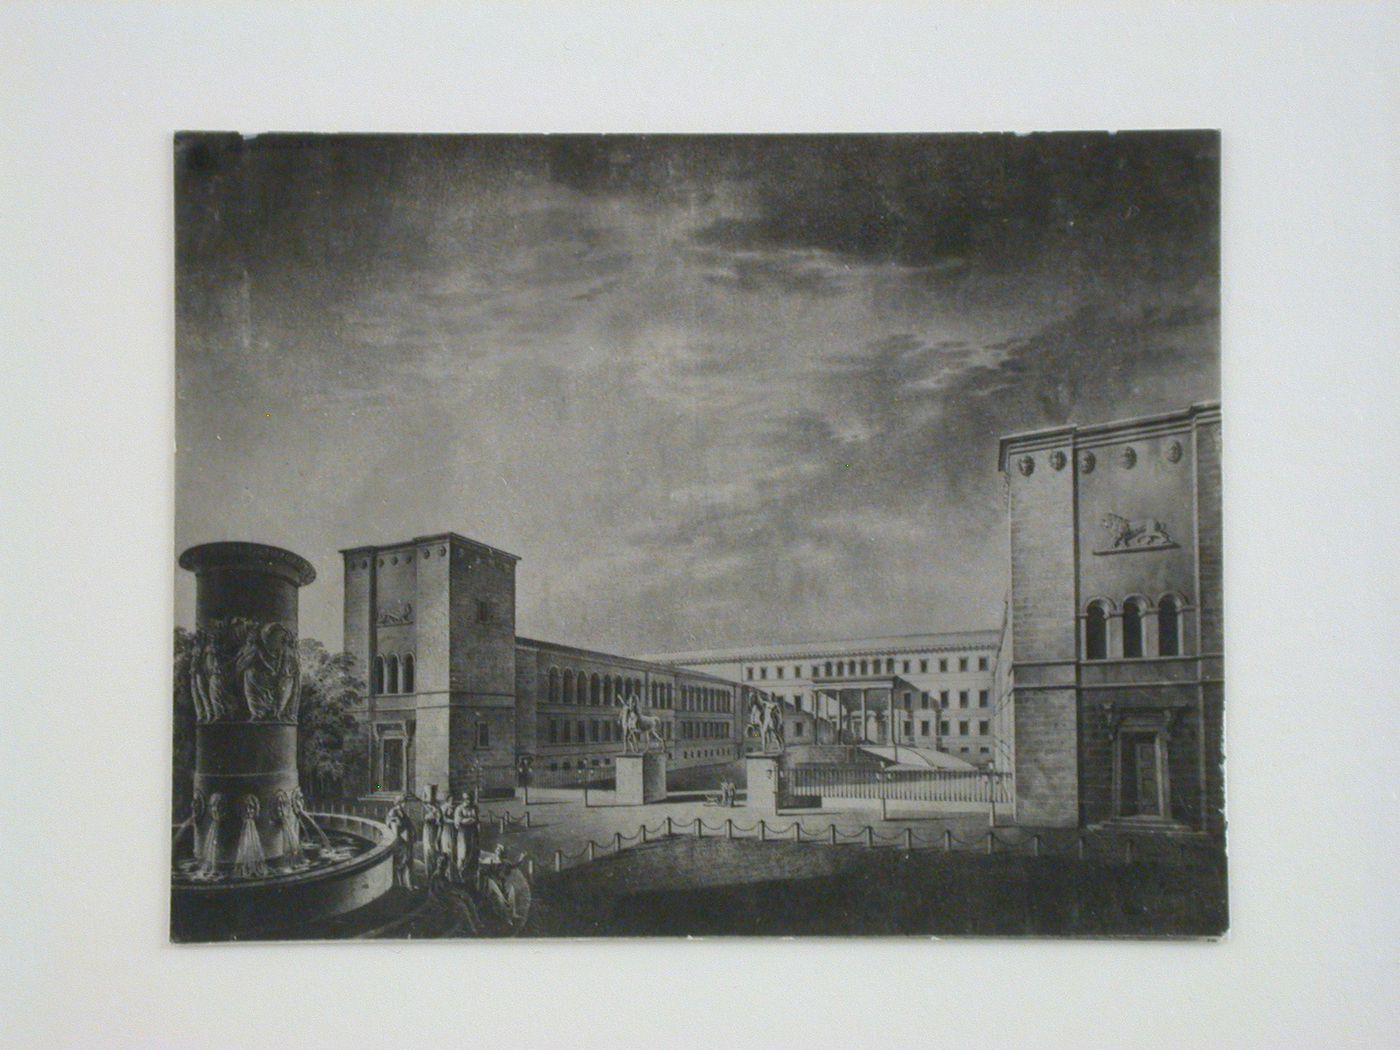 Photograph of a rendering for a palace in Köstritz, near Bad Köstritz, Germany